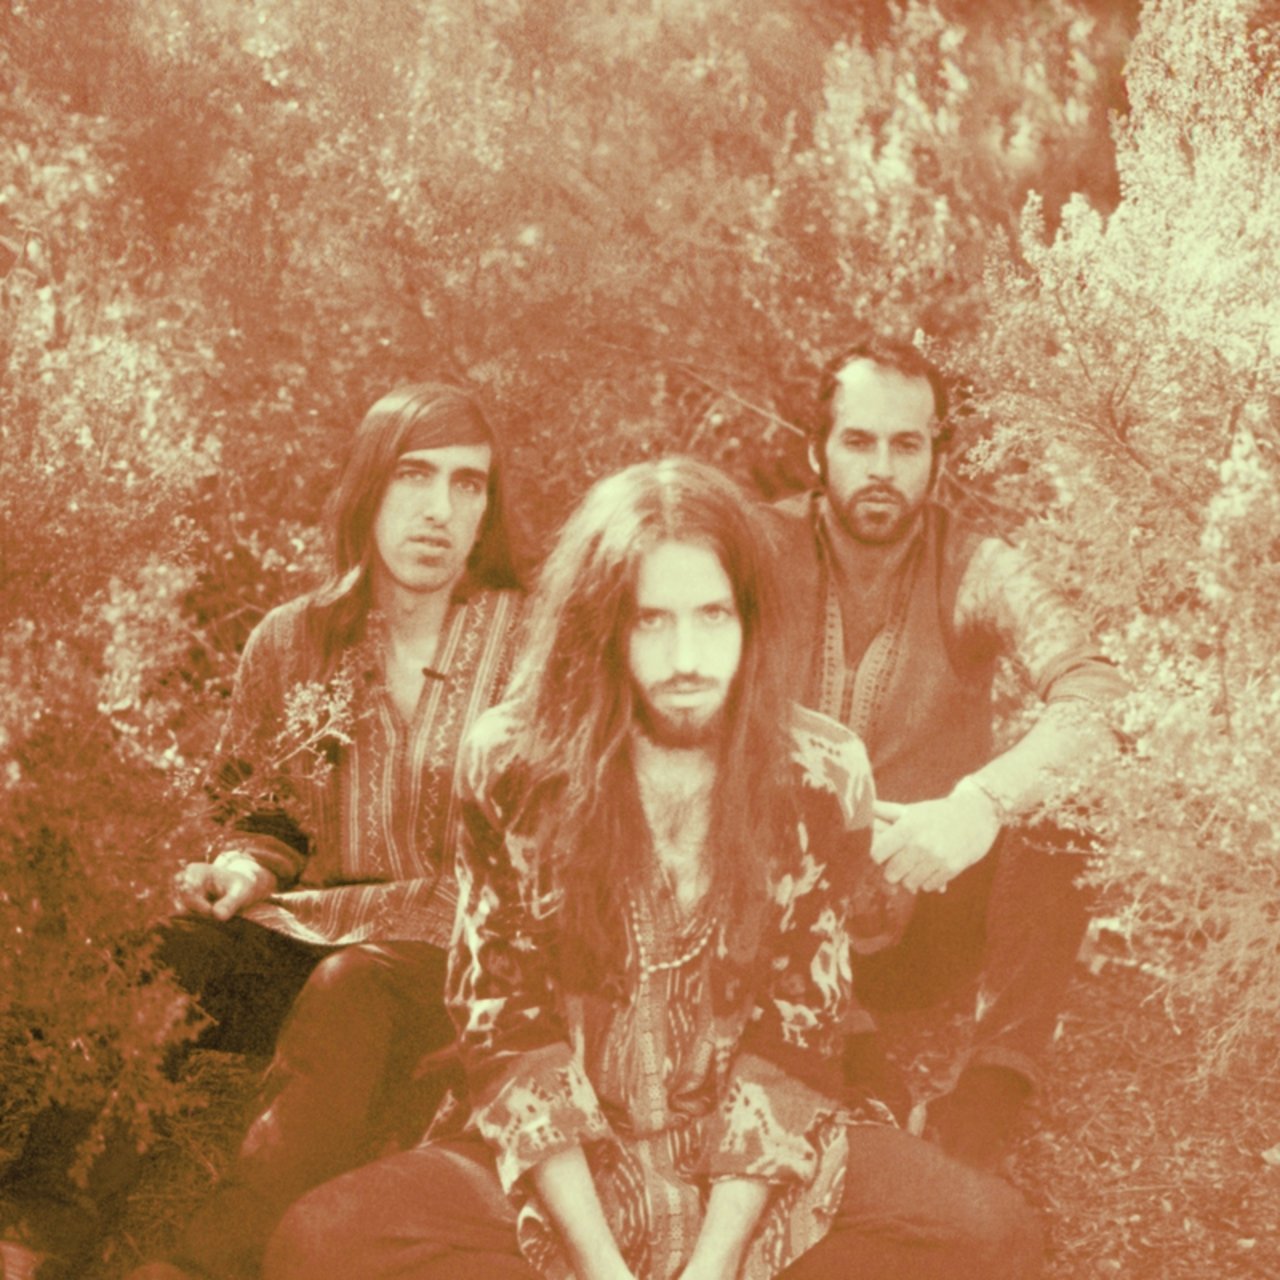 Crystal Fighters Love Natural cover artwork